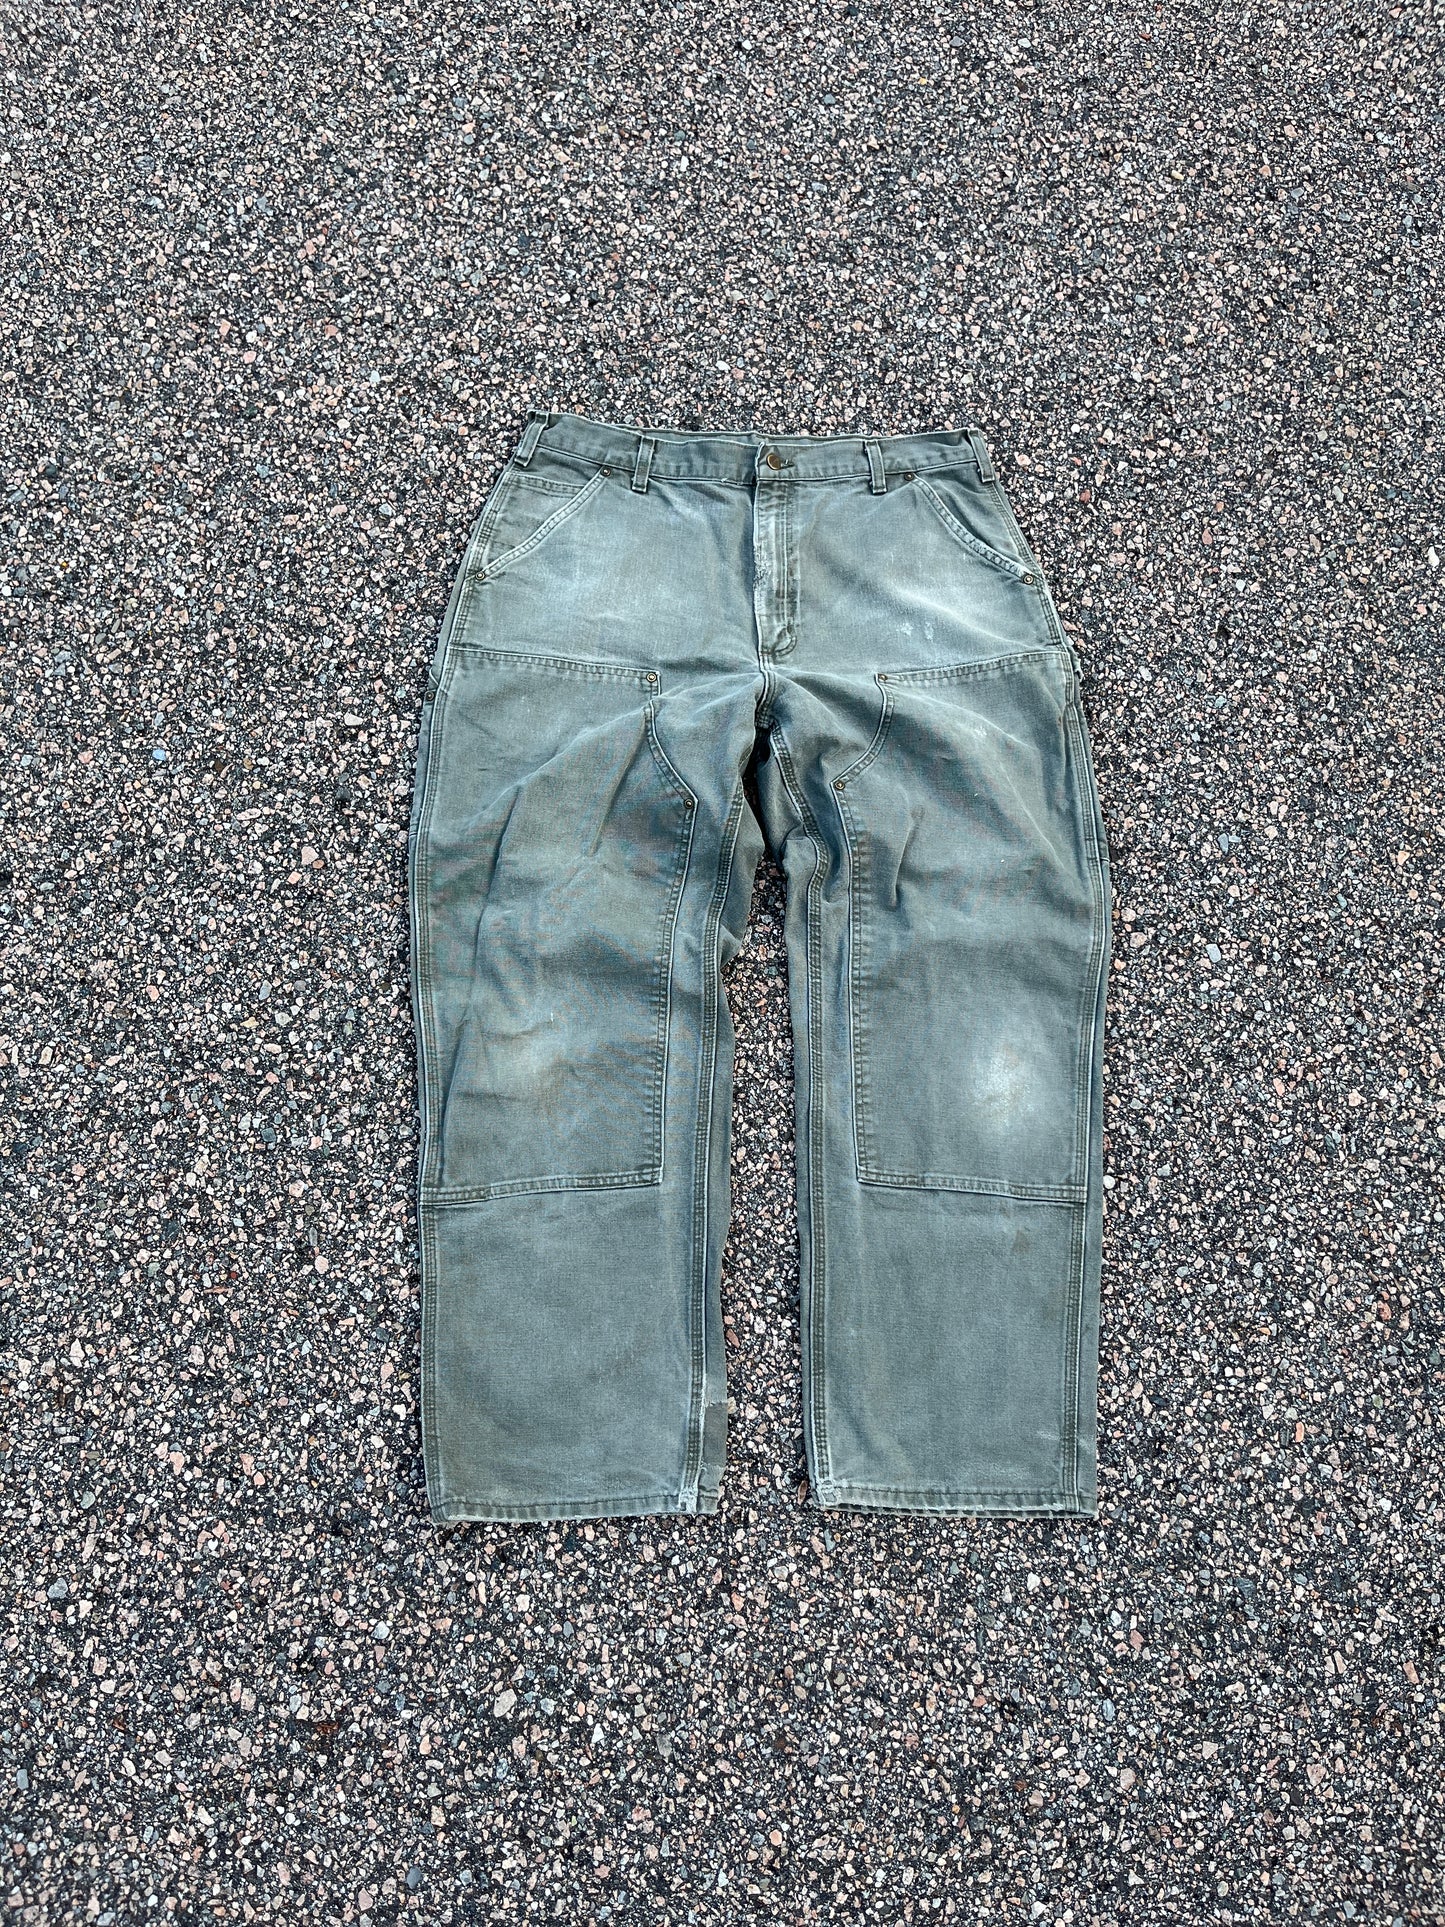 Faded Olive Green Carhartt Double Knee Pants - 36 x 29